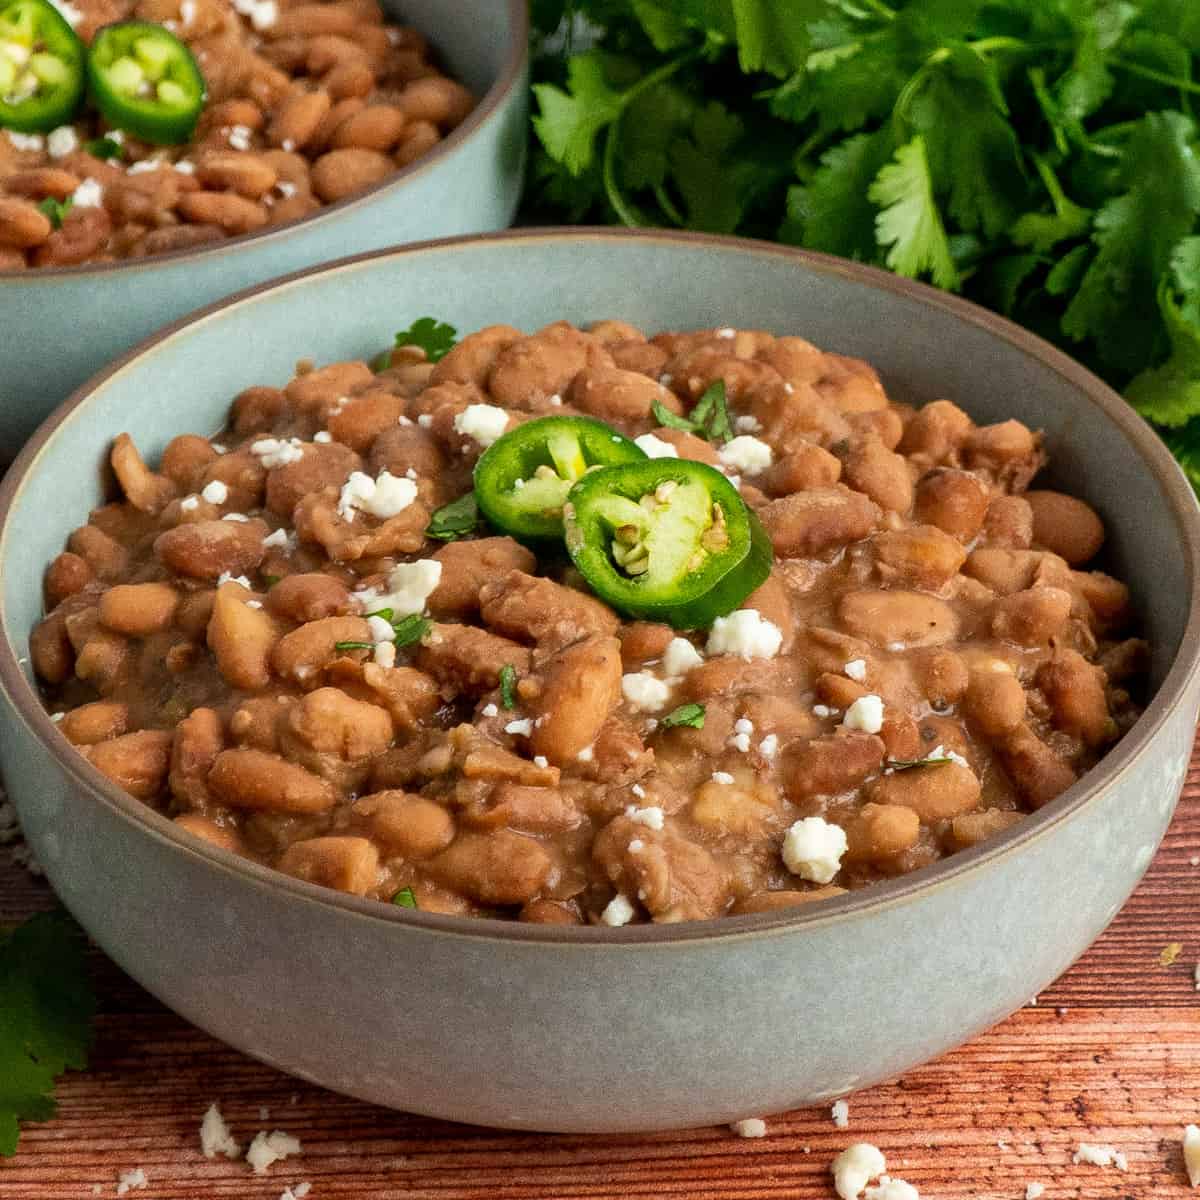 Pinto beans in a bowl garnished with cheese and jalapenos.